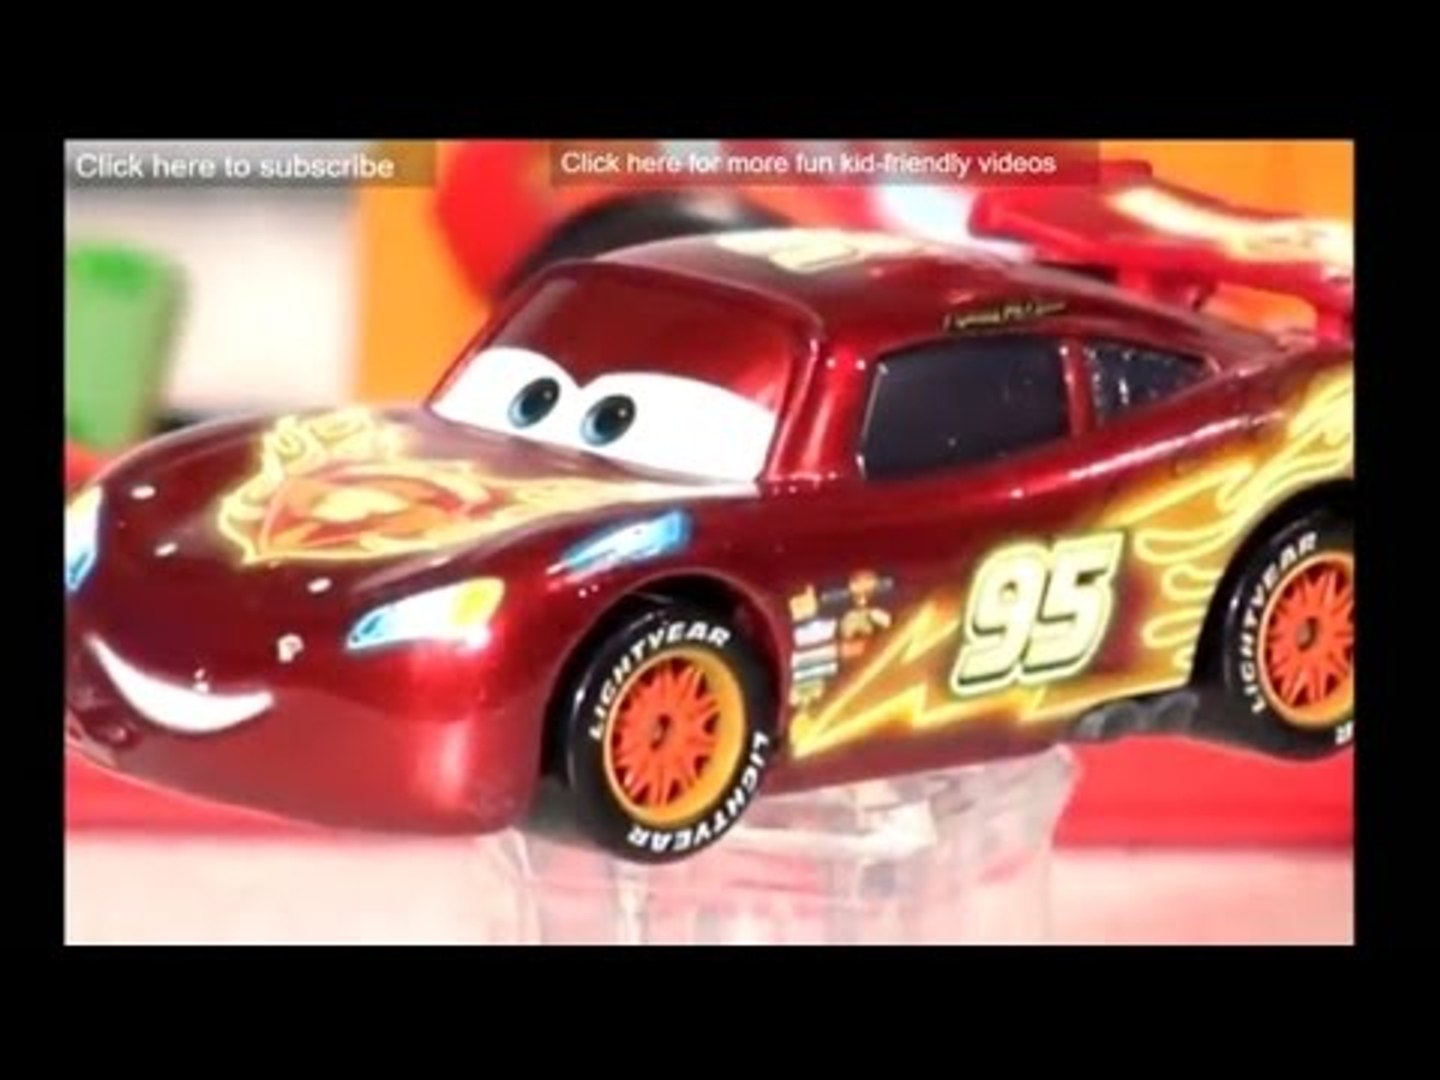 ⁣The Pixar Cars Live Stream with Lightning McQueen Cars and Mater with Cars 2 Race Cars